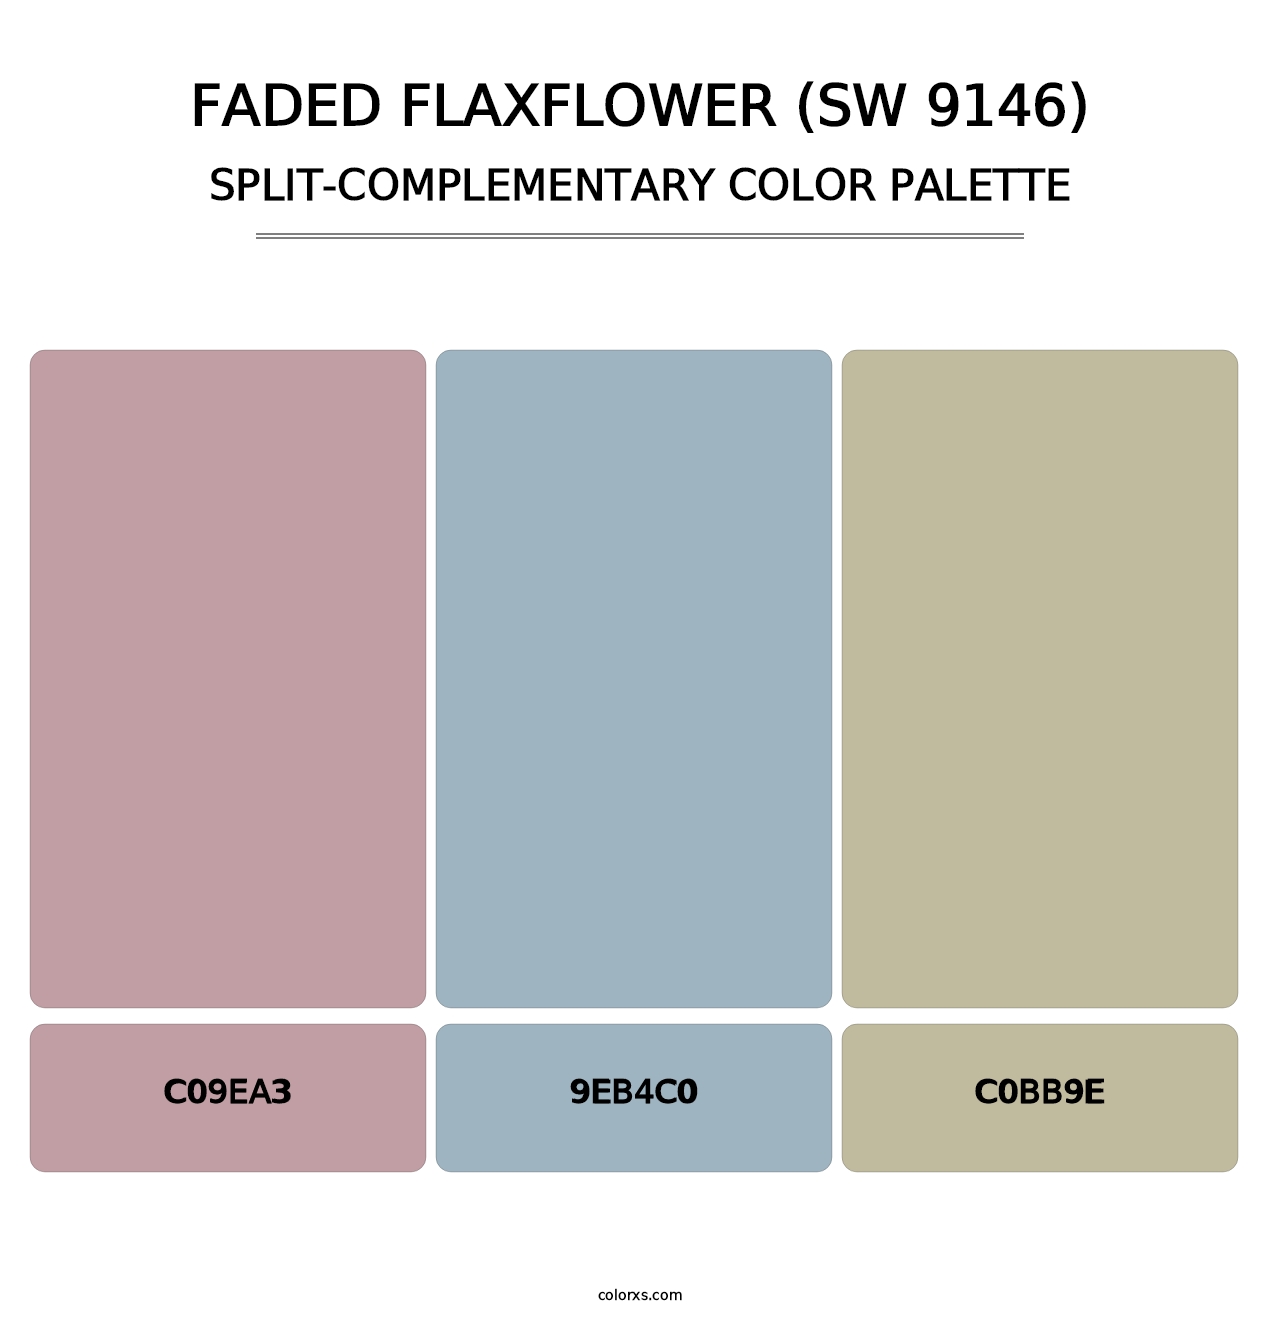 Faded Flaxflower (SW 9146) - Split-Complementary Color Palette